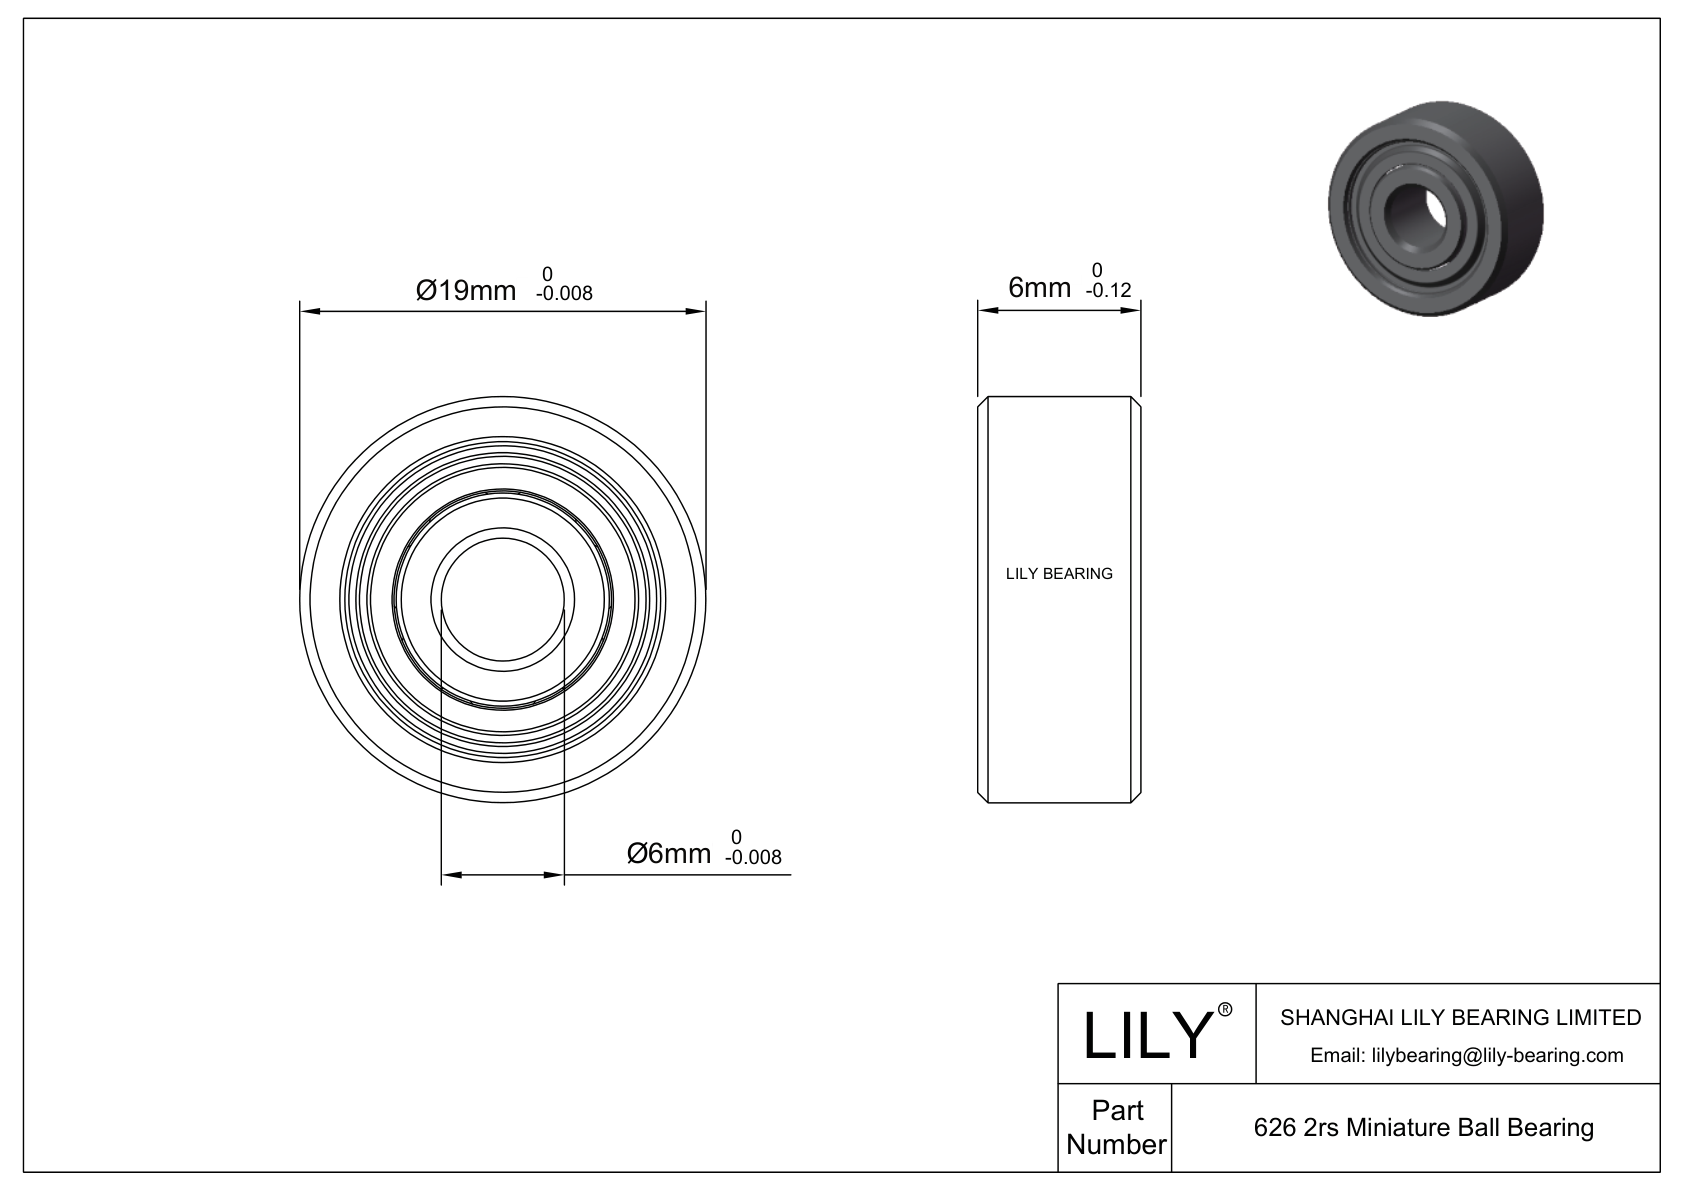 LILY-PUT62632-40C1L9M5 Outsourcing Polyurethane Coated Bearing With Screw cad drawing